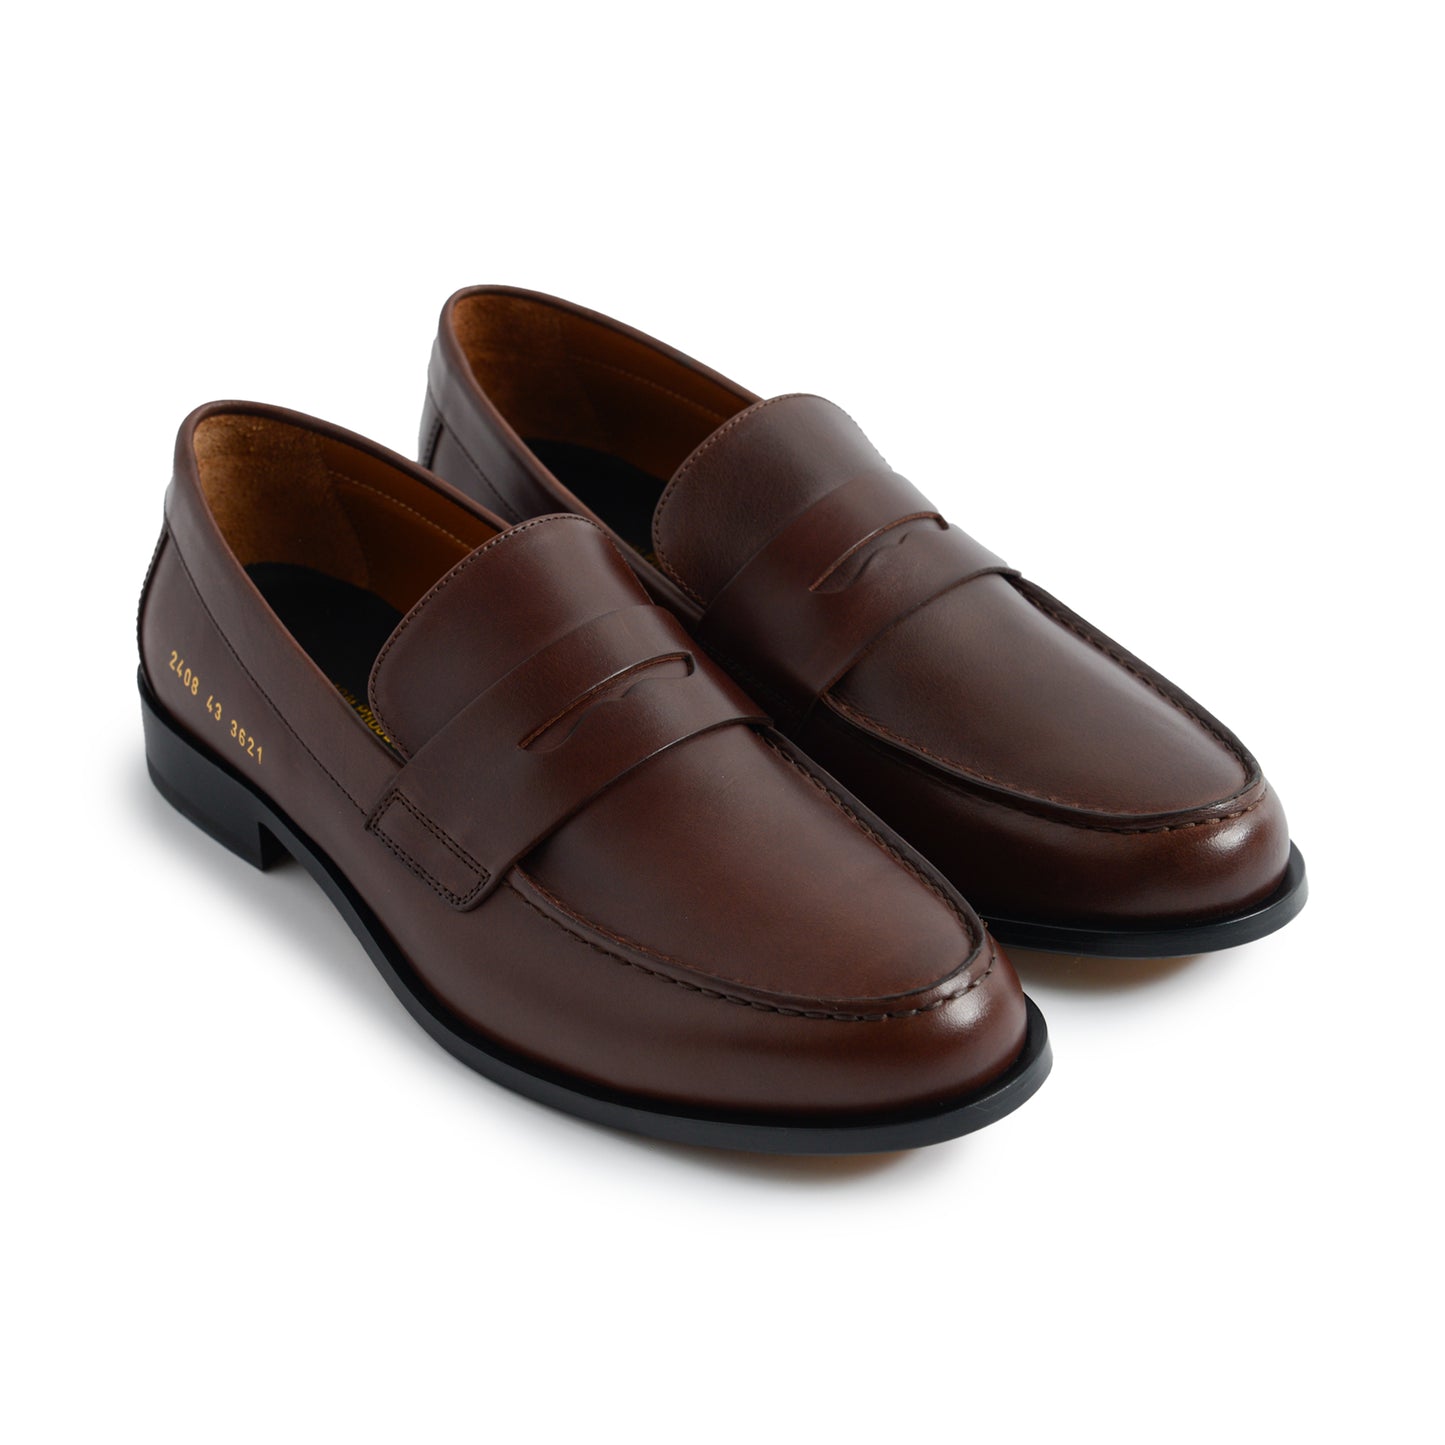 Common Projects Dress Loafers